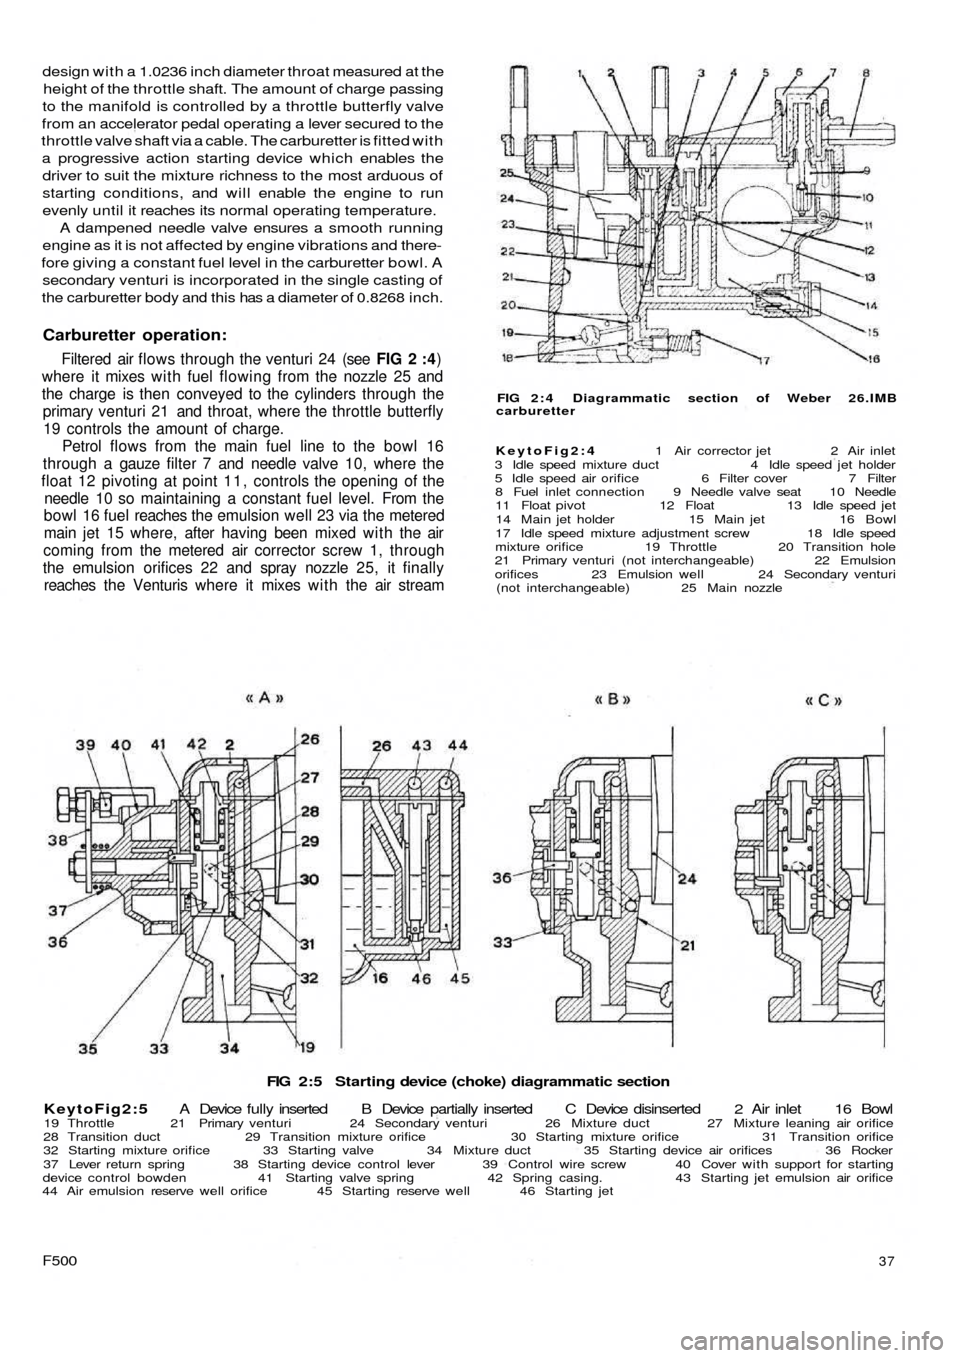 FIAT 500 1966 1.G Workshop Manual FIG 2:5  Starting device (choke) diagrammatic section
KeytoFig2:5 A  Device  fully inserted  B  Device  partially  inserted  C  Device  disinserted  2  Air  inlet 16 Bowl
19 Throttle  21 Primary ventu